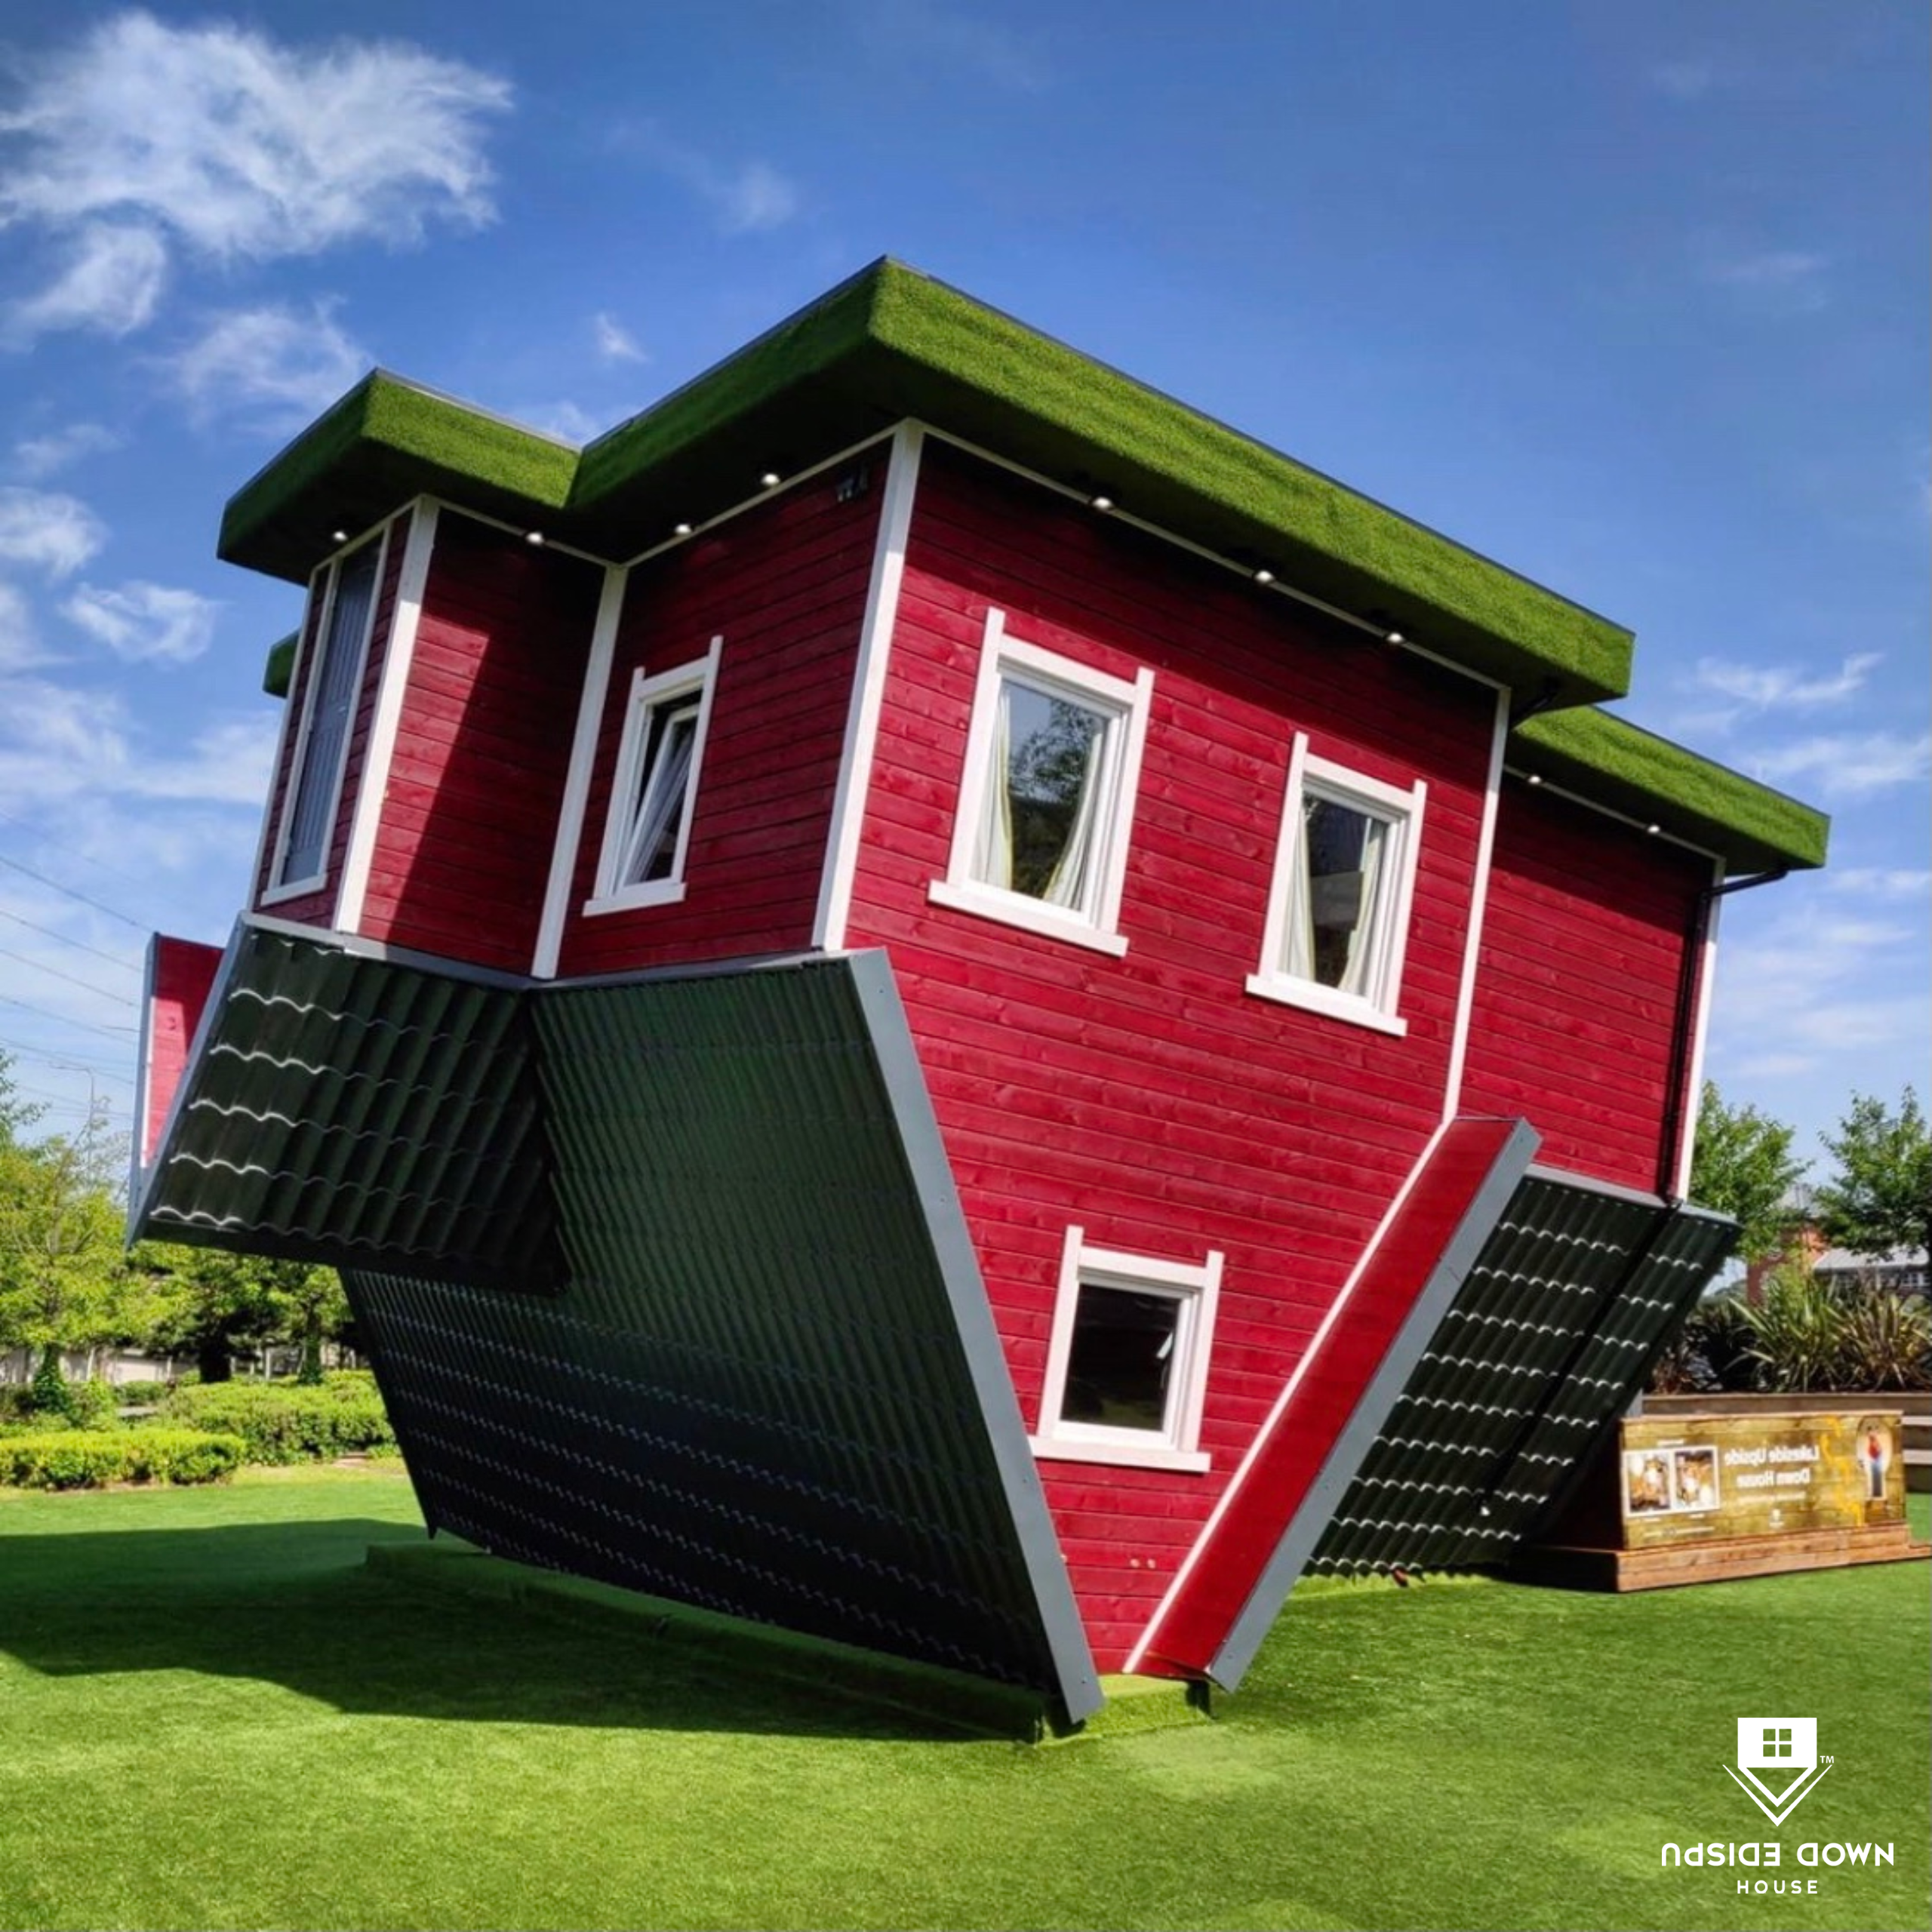 Upside Down House Lakeside - Indoor in West Thurrock, Grays - Visit Essex